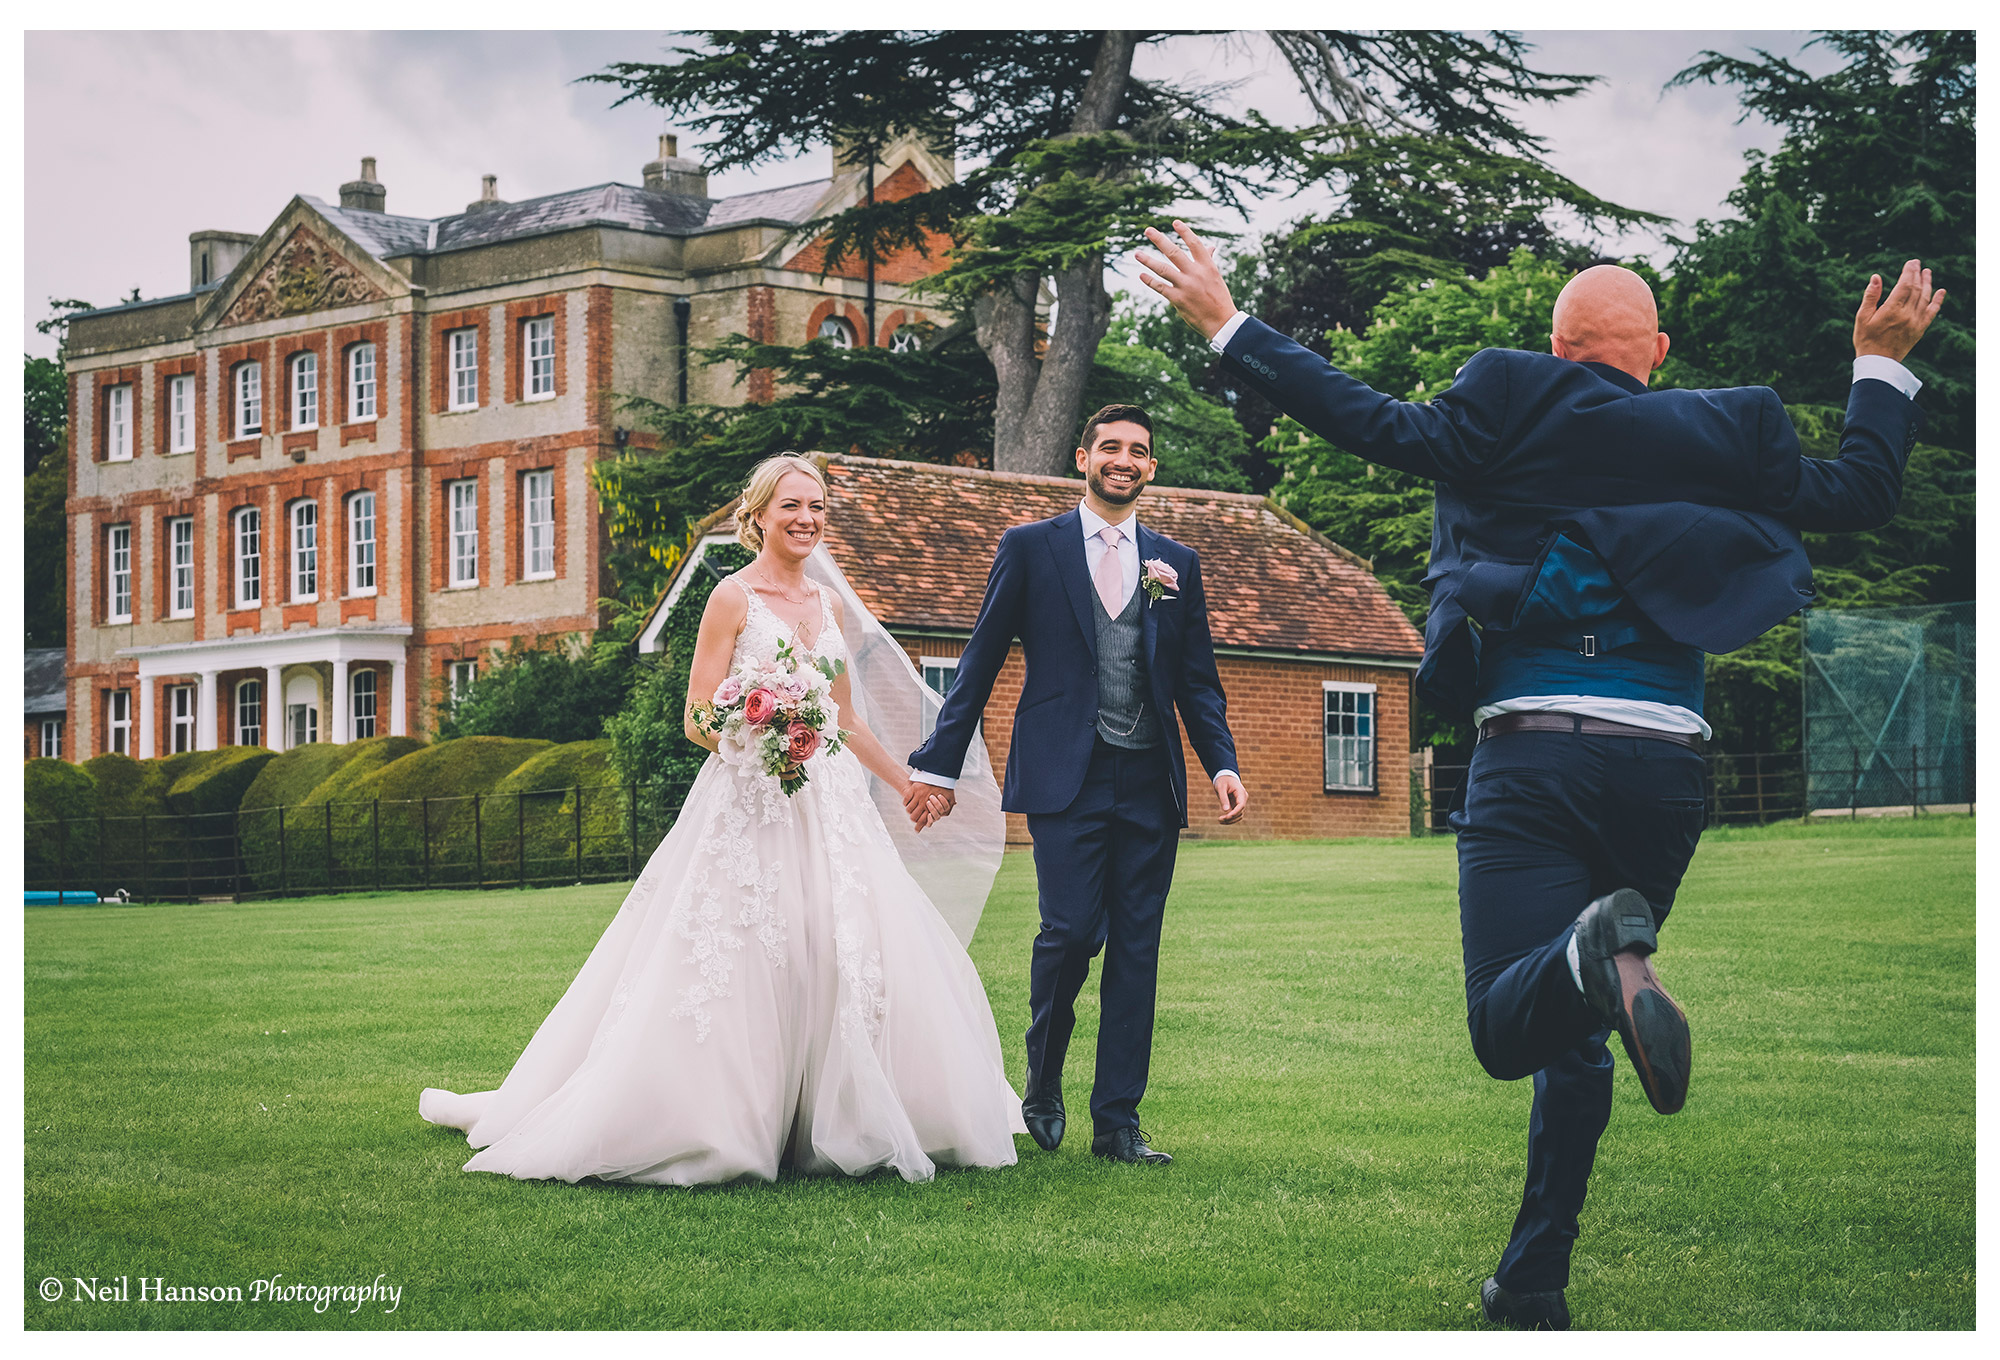 Wedding guest greets the bride and groom at Ardington House in Oxfordshire